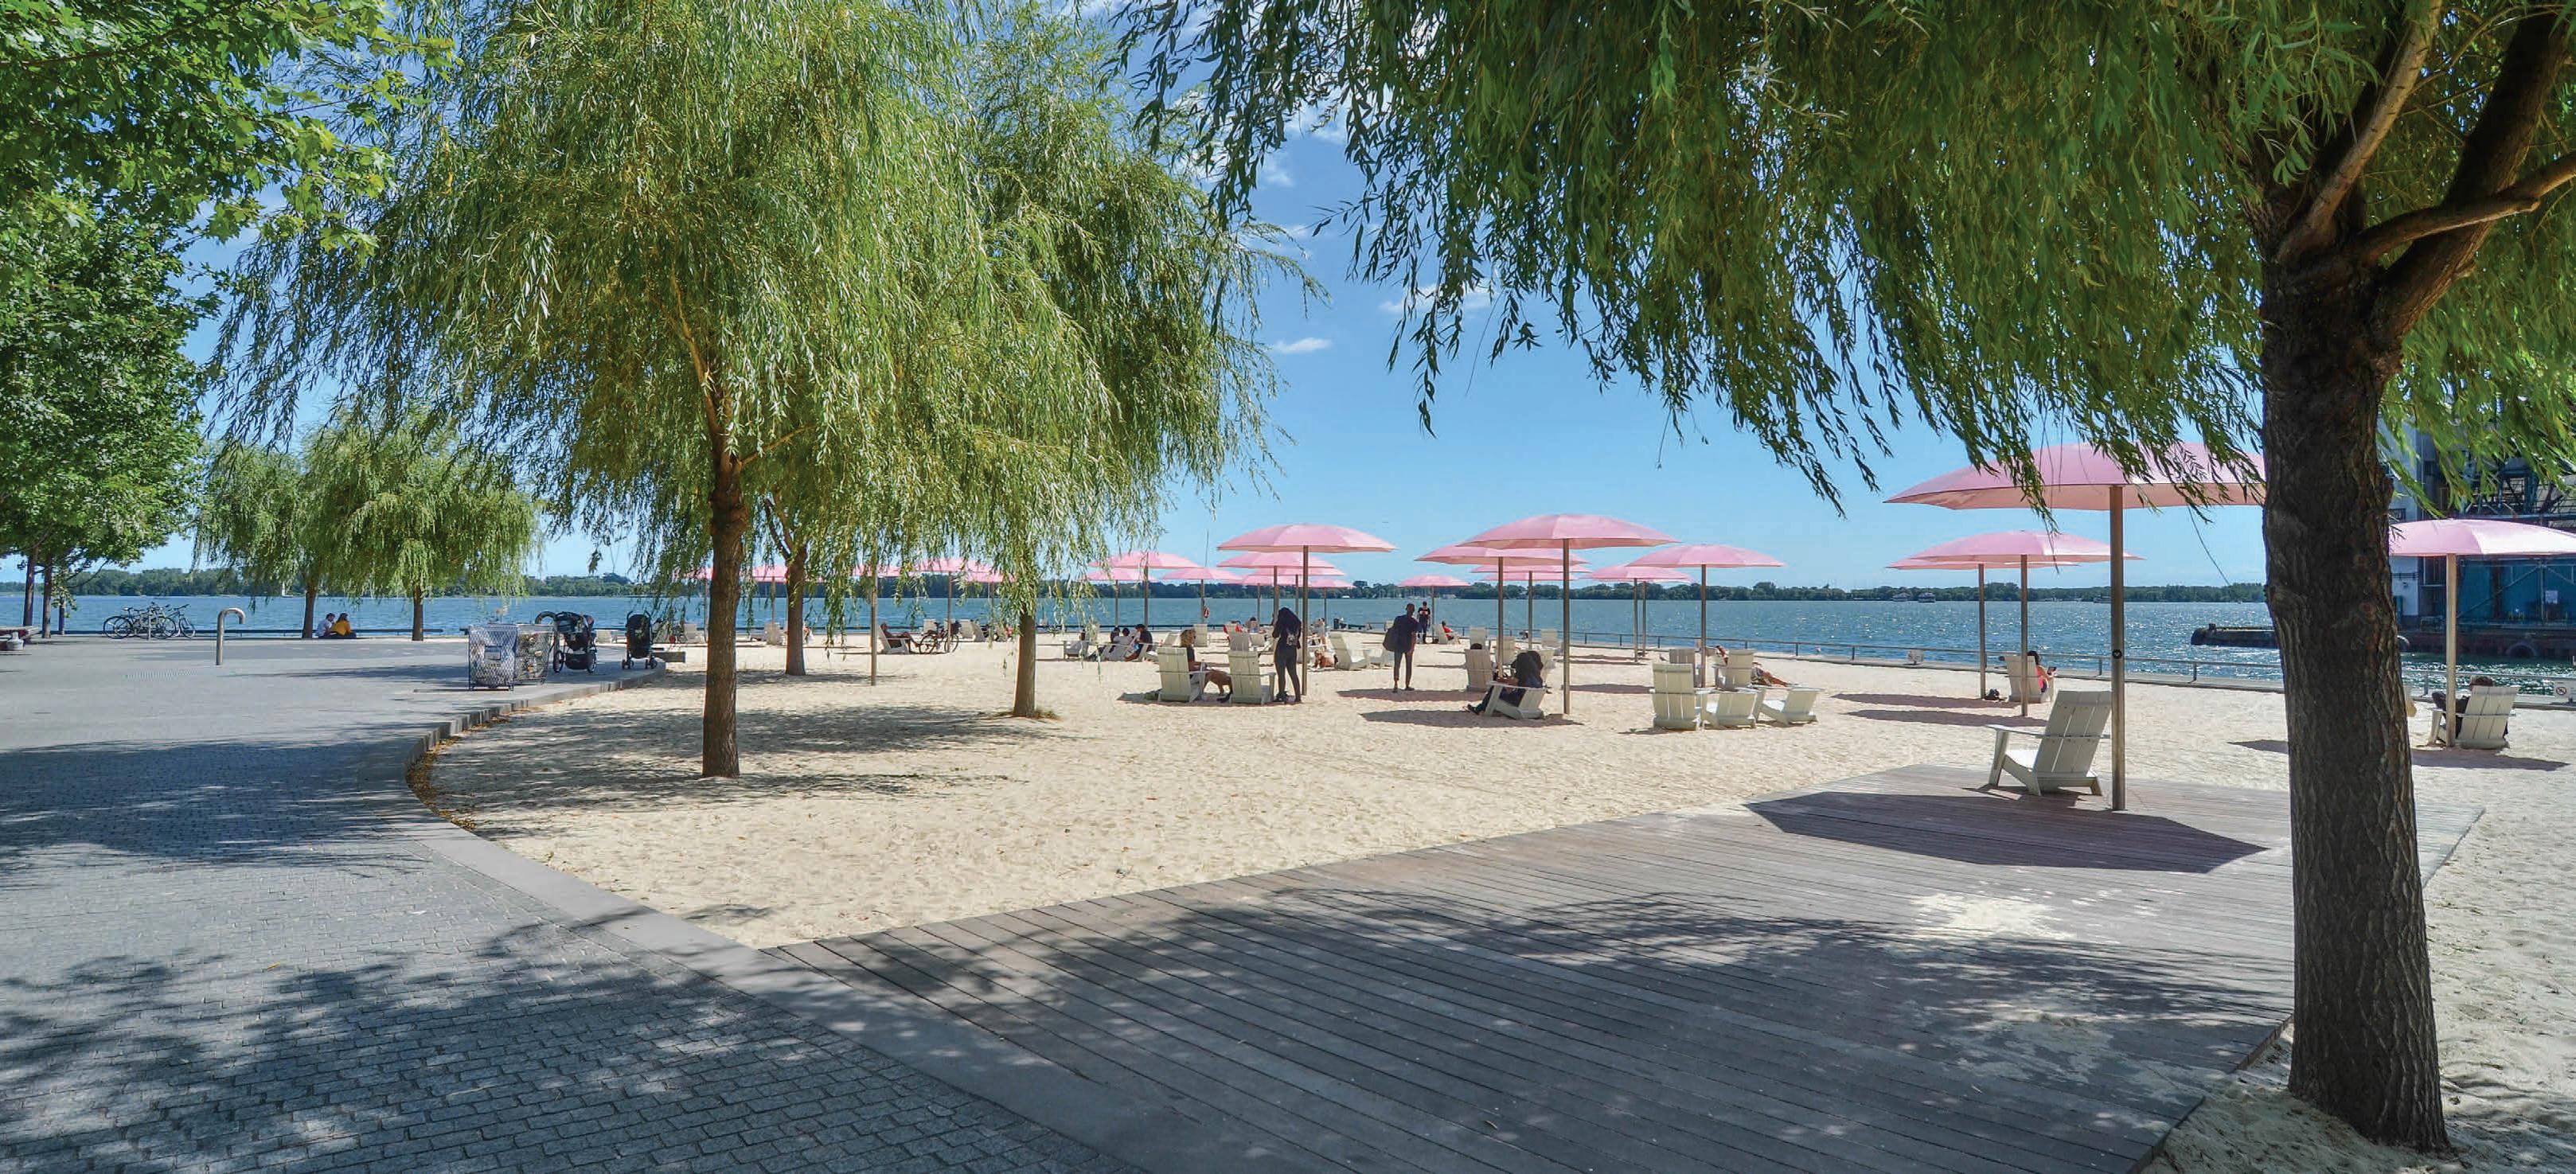 a sandy urban beach with pink umbrellas and trees